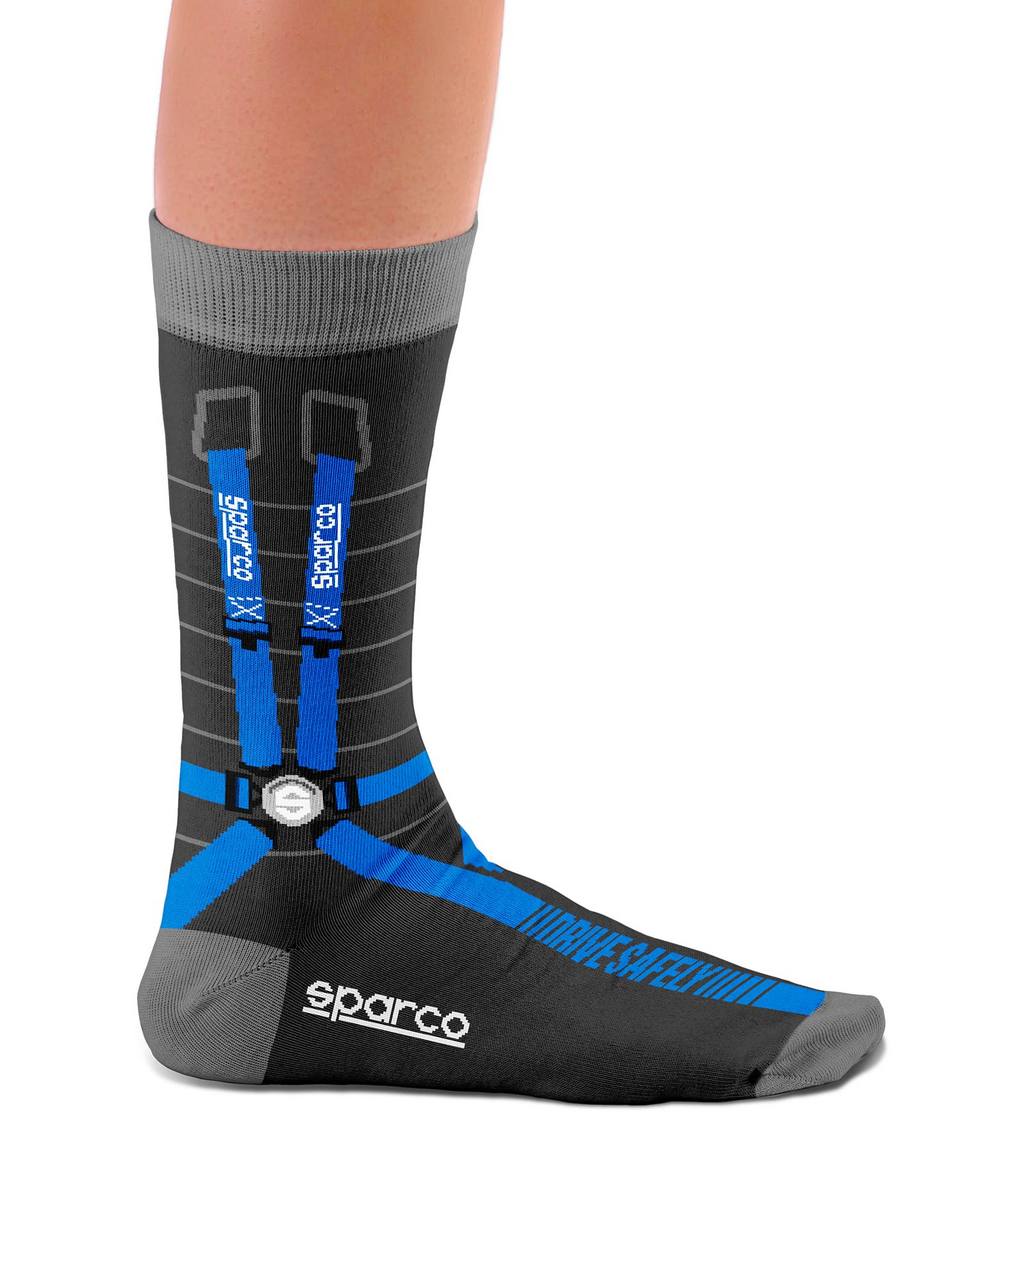 SPARCO 099144..36-40H Sparco iconic design socks 36-40 Photo-0 